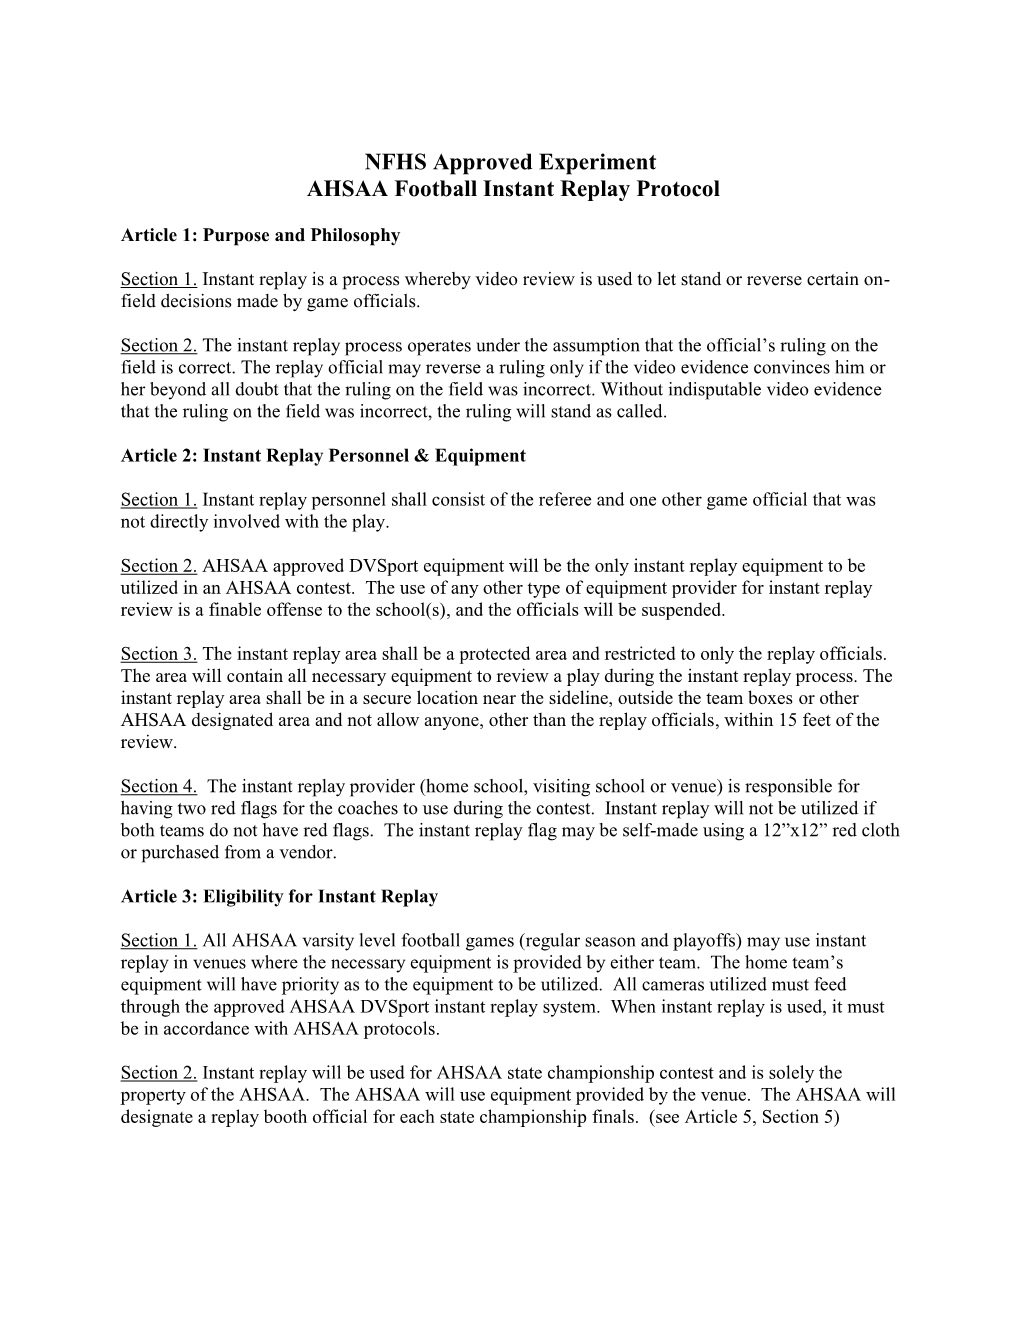 NFHS Approved Experiment AHSAA Football Instant Replay Protocol